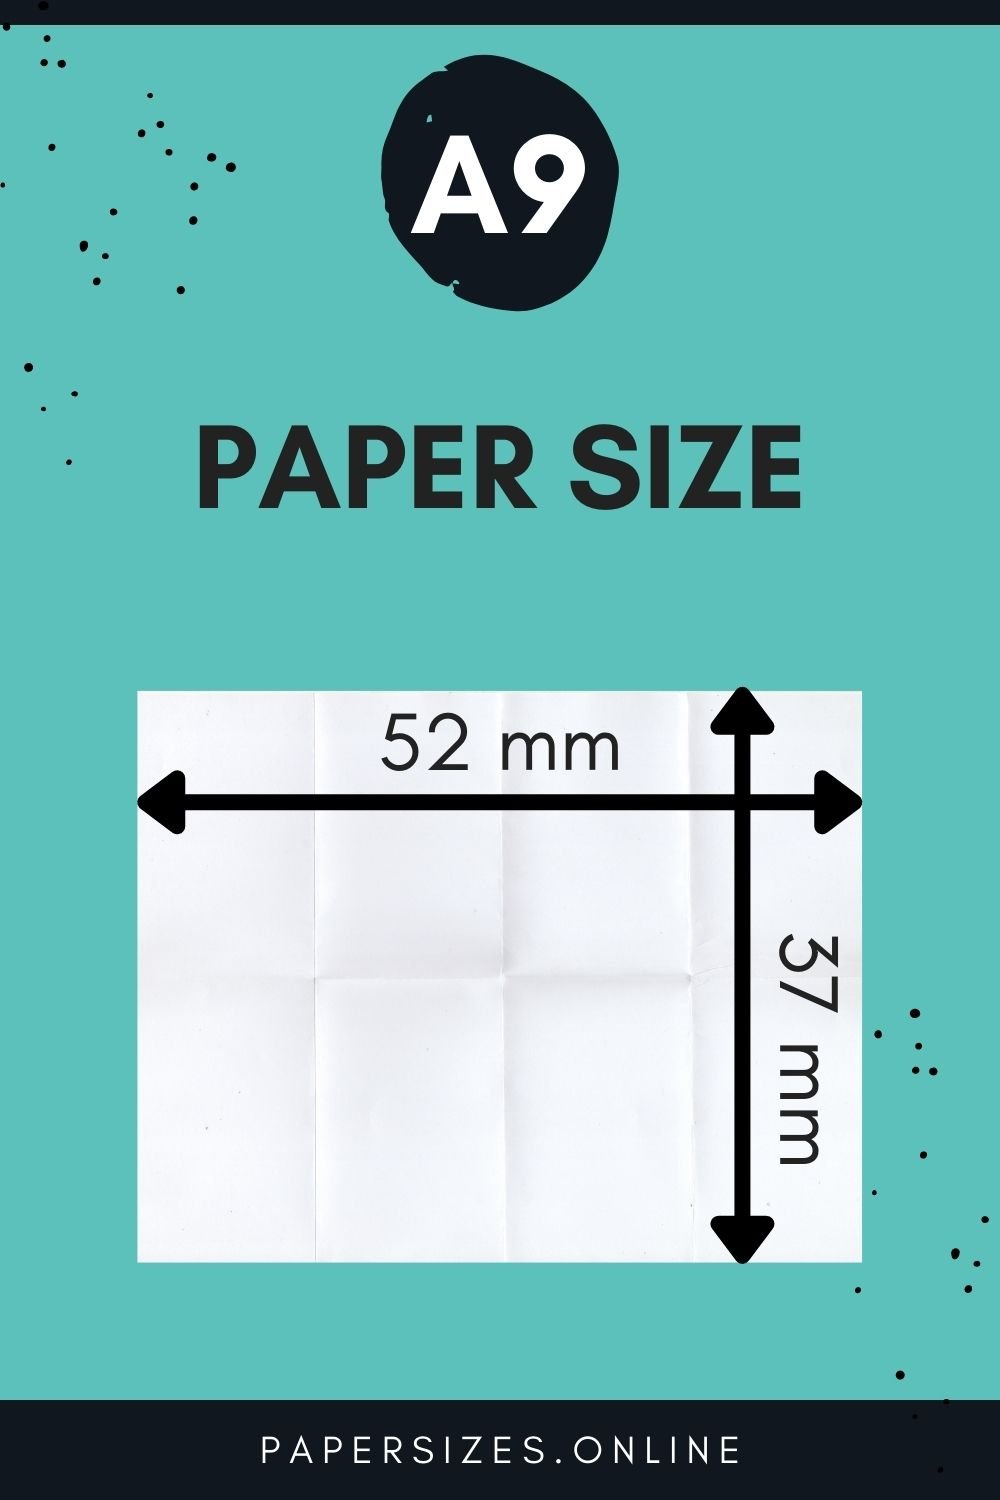 a9-paper-size-and-dimensions-paper-sizes-online